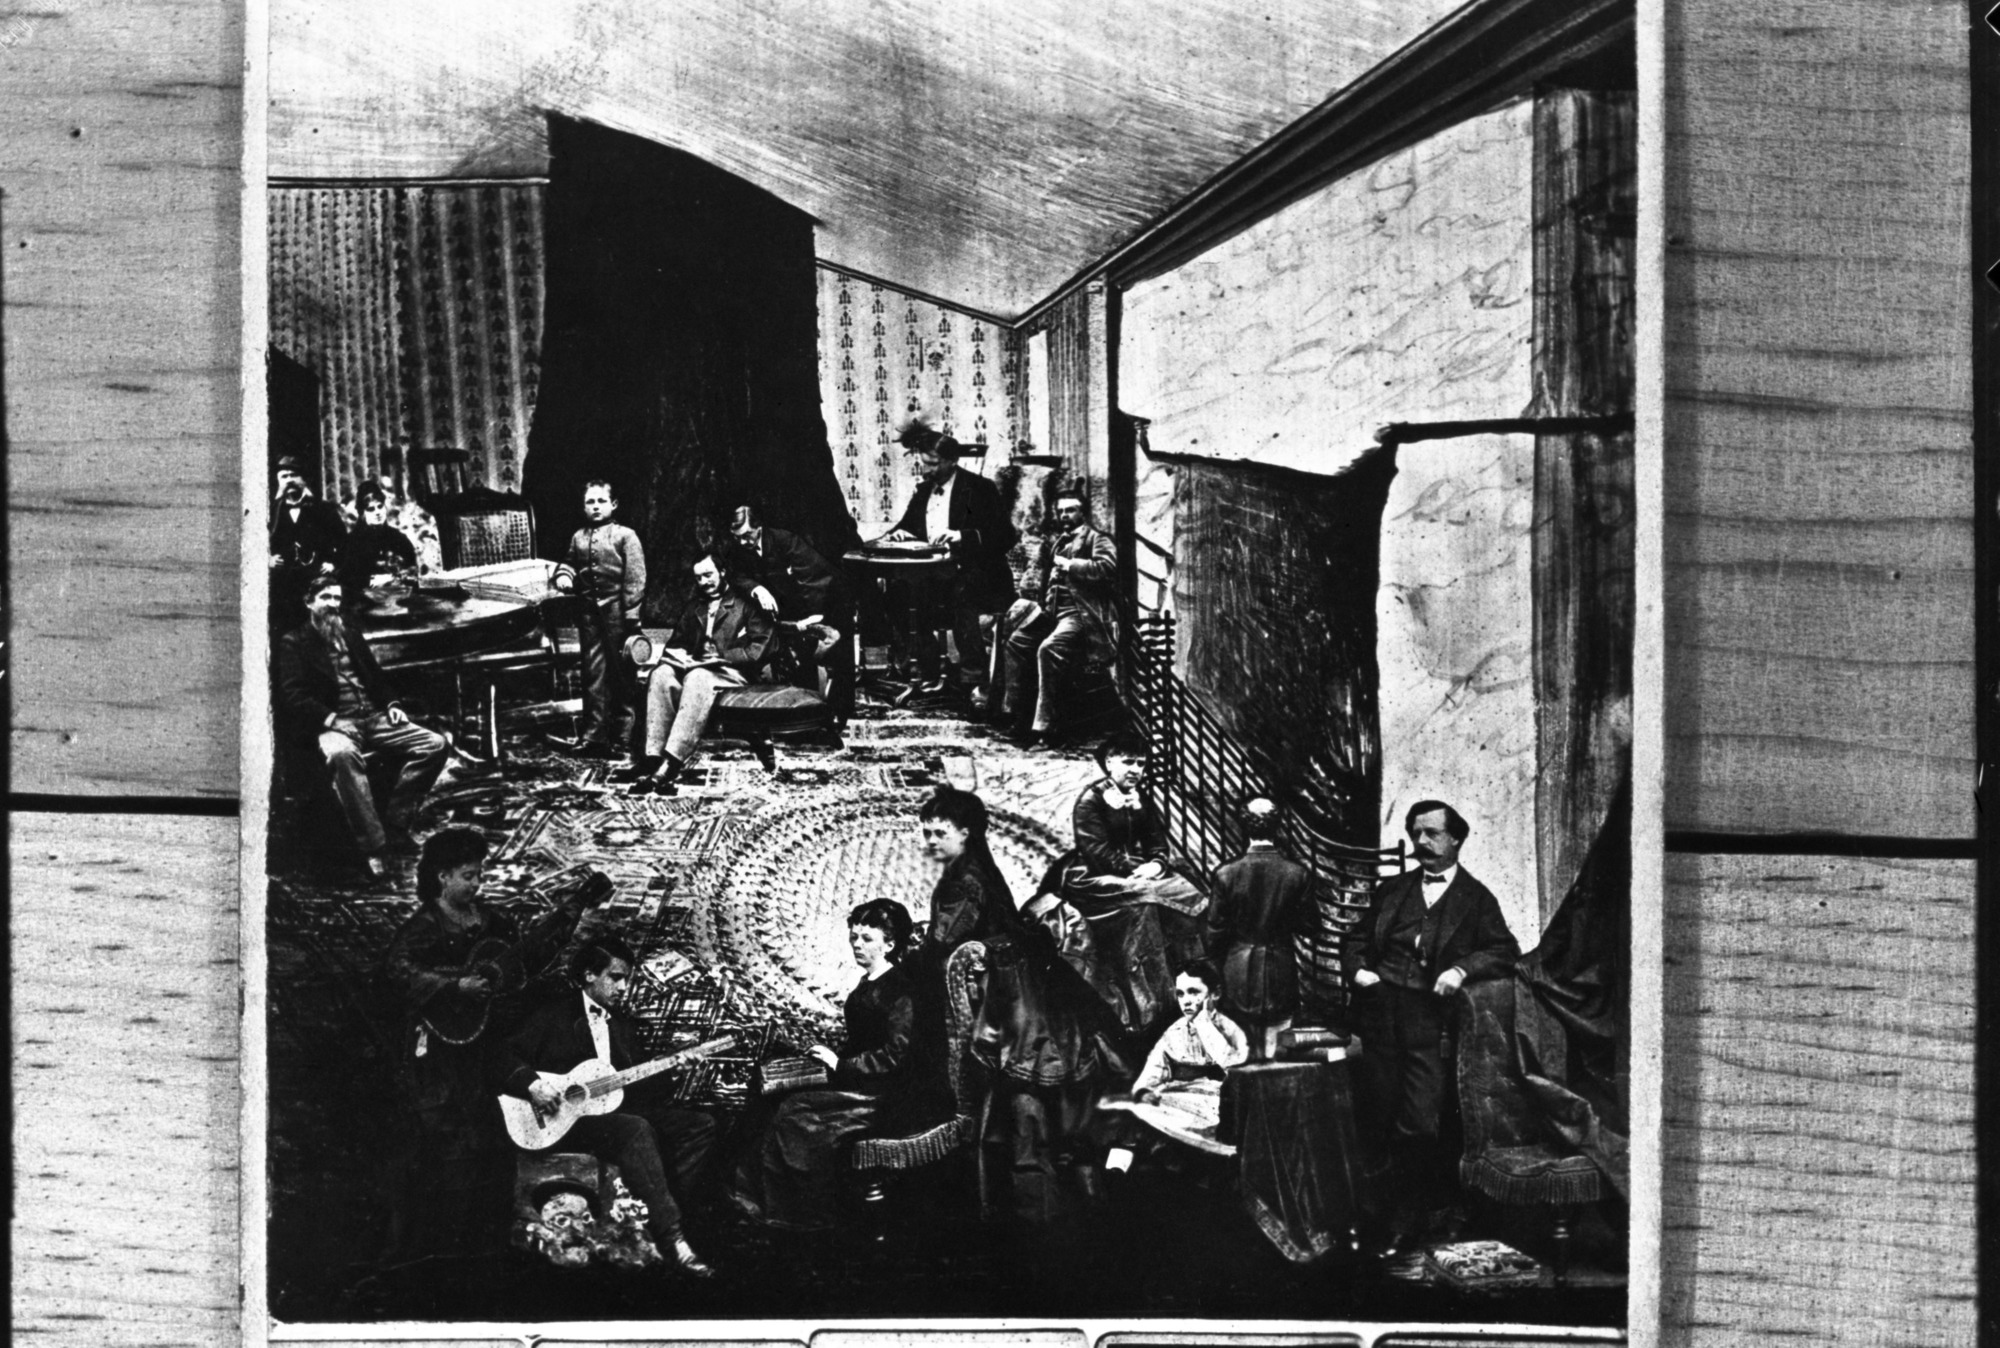 (From an old photo) Big Tree room in Hutching's Hotel. Copy from an old photo